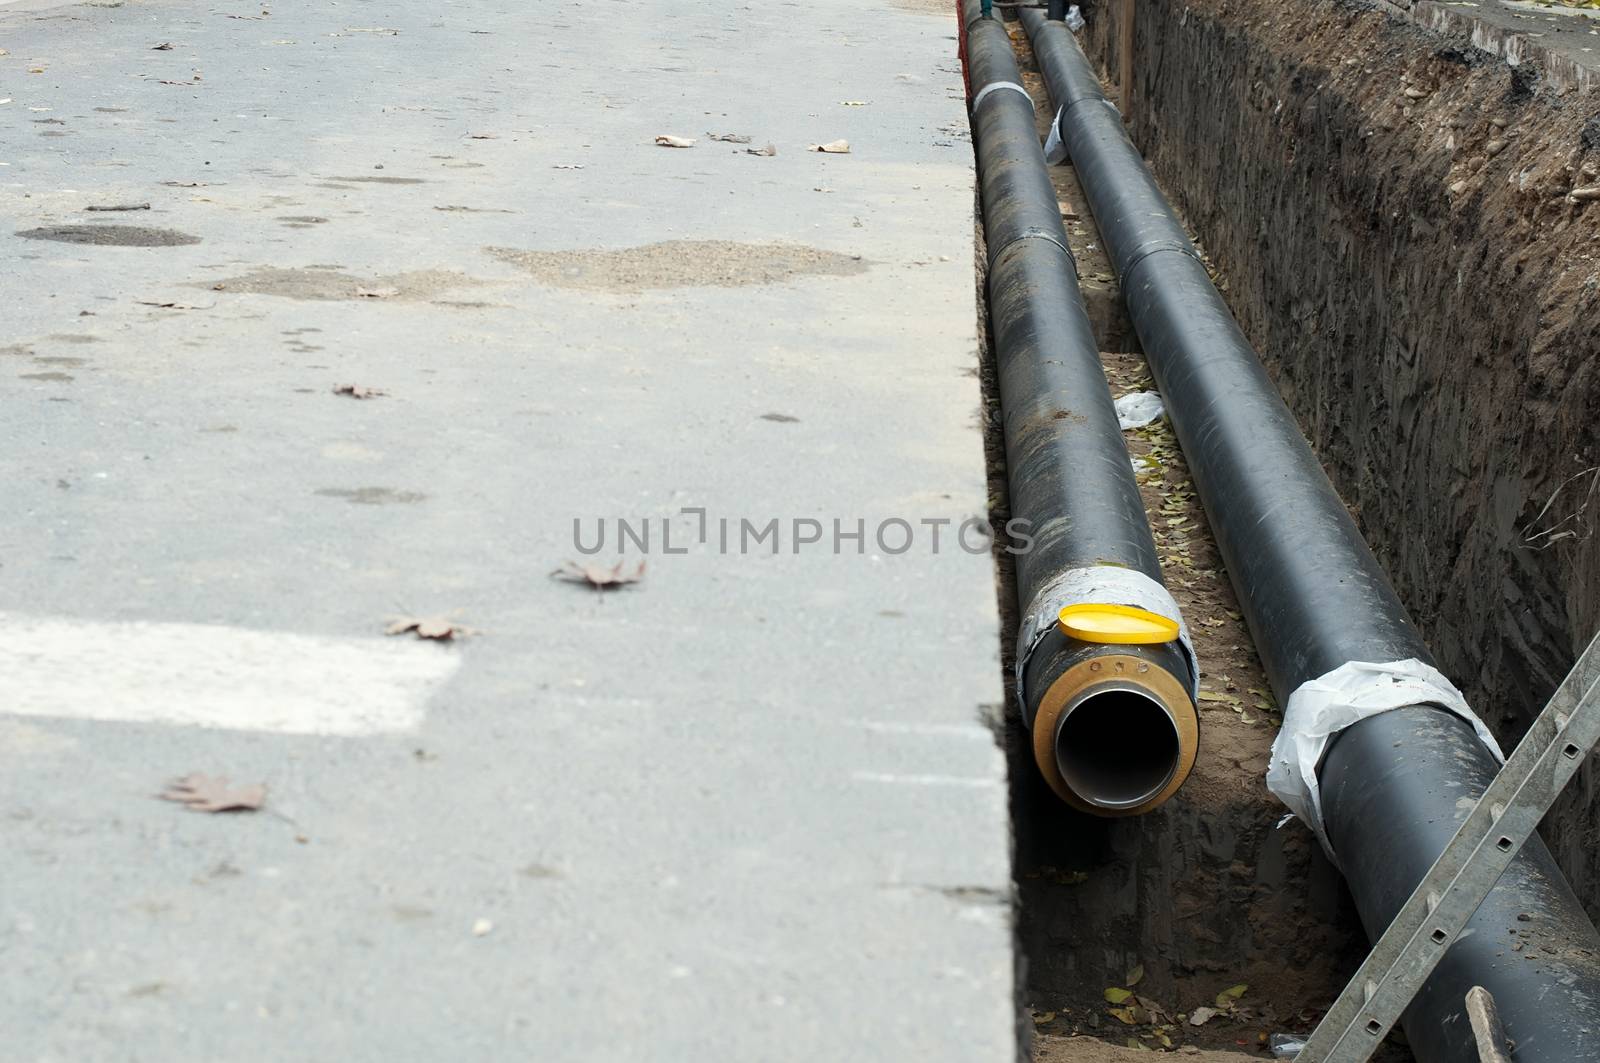 Installing pipes for hot water and steam heating. City heat pipeline